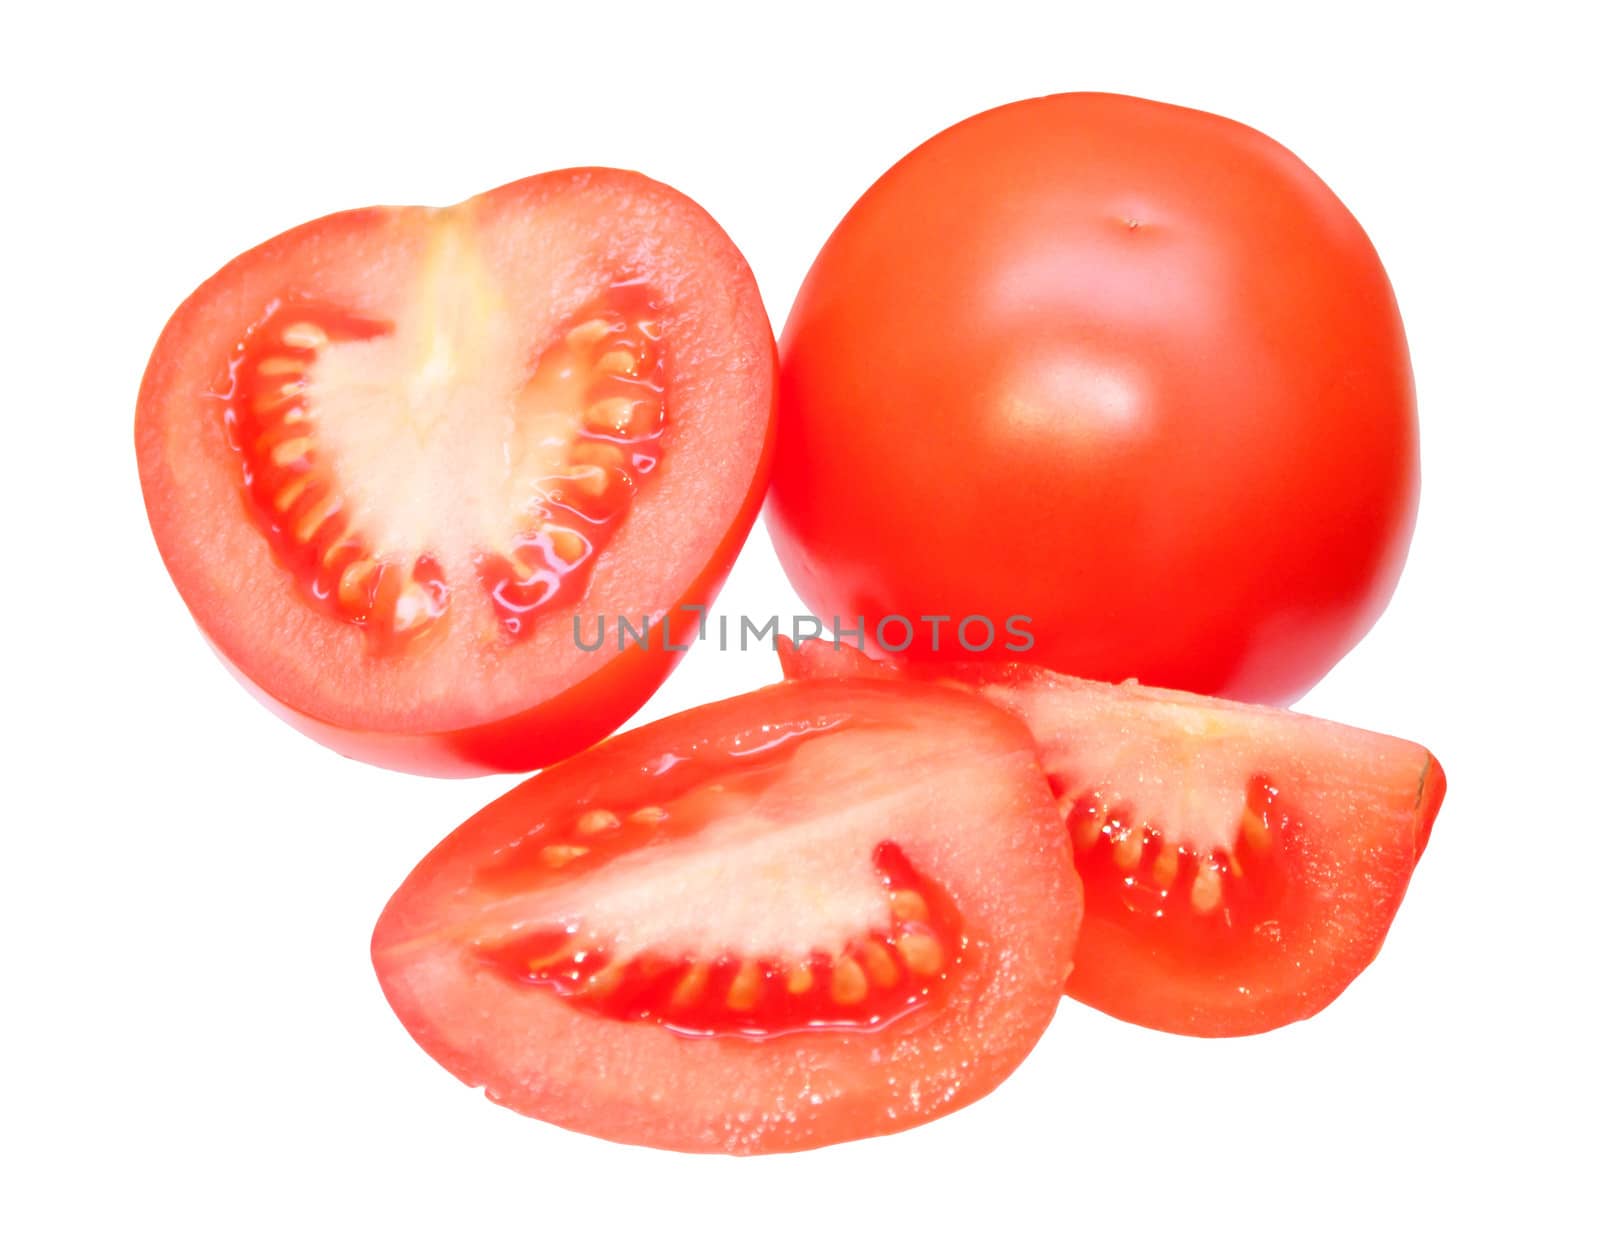 Cut tomatoes, isolated on white background by evp82